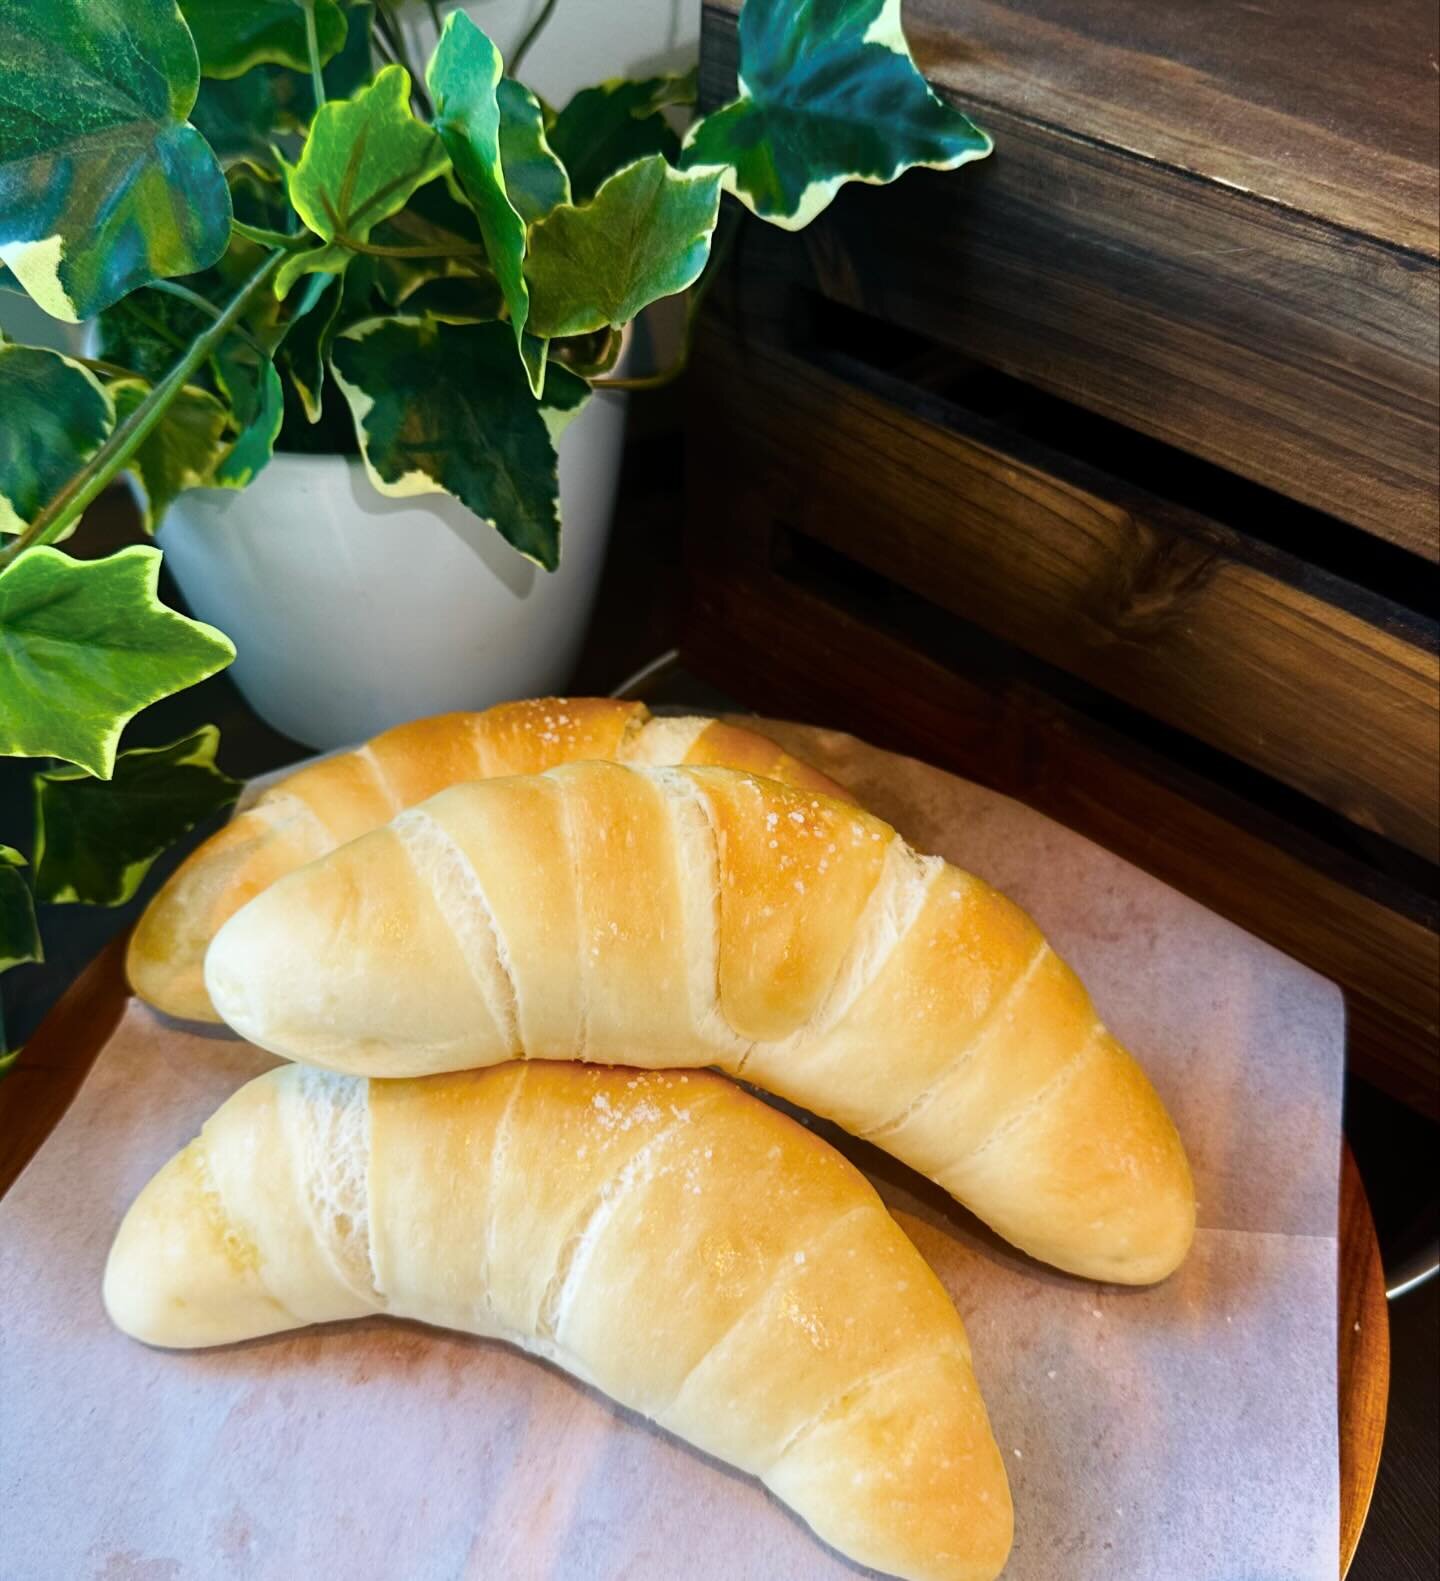 Have you ever tried out our Salt &amp; Butter roll ?!?!

Our Salt &amp; Butter rolls are made with 100% Hokkaido flour. Soft and fluffy on the inside, yet it packs a satisfying crunch with its crust and unique buttery and crunchy bottom, that keeps y